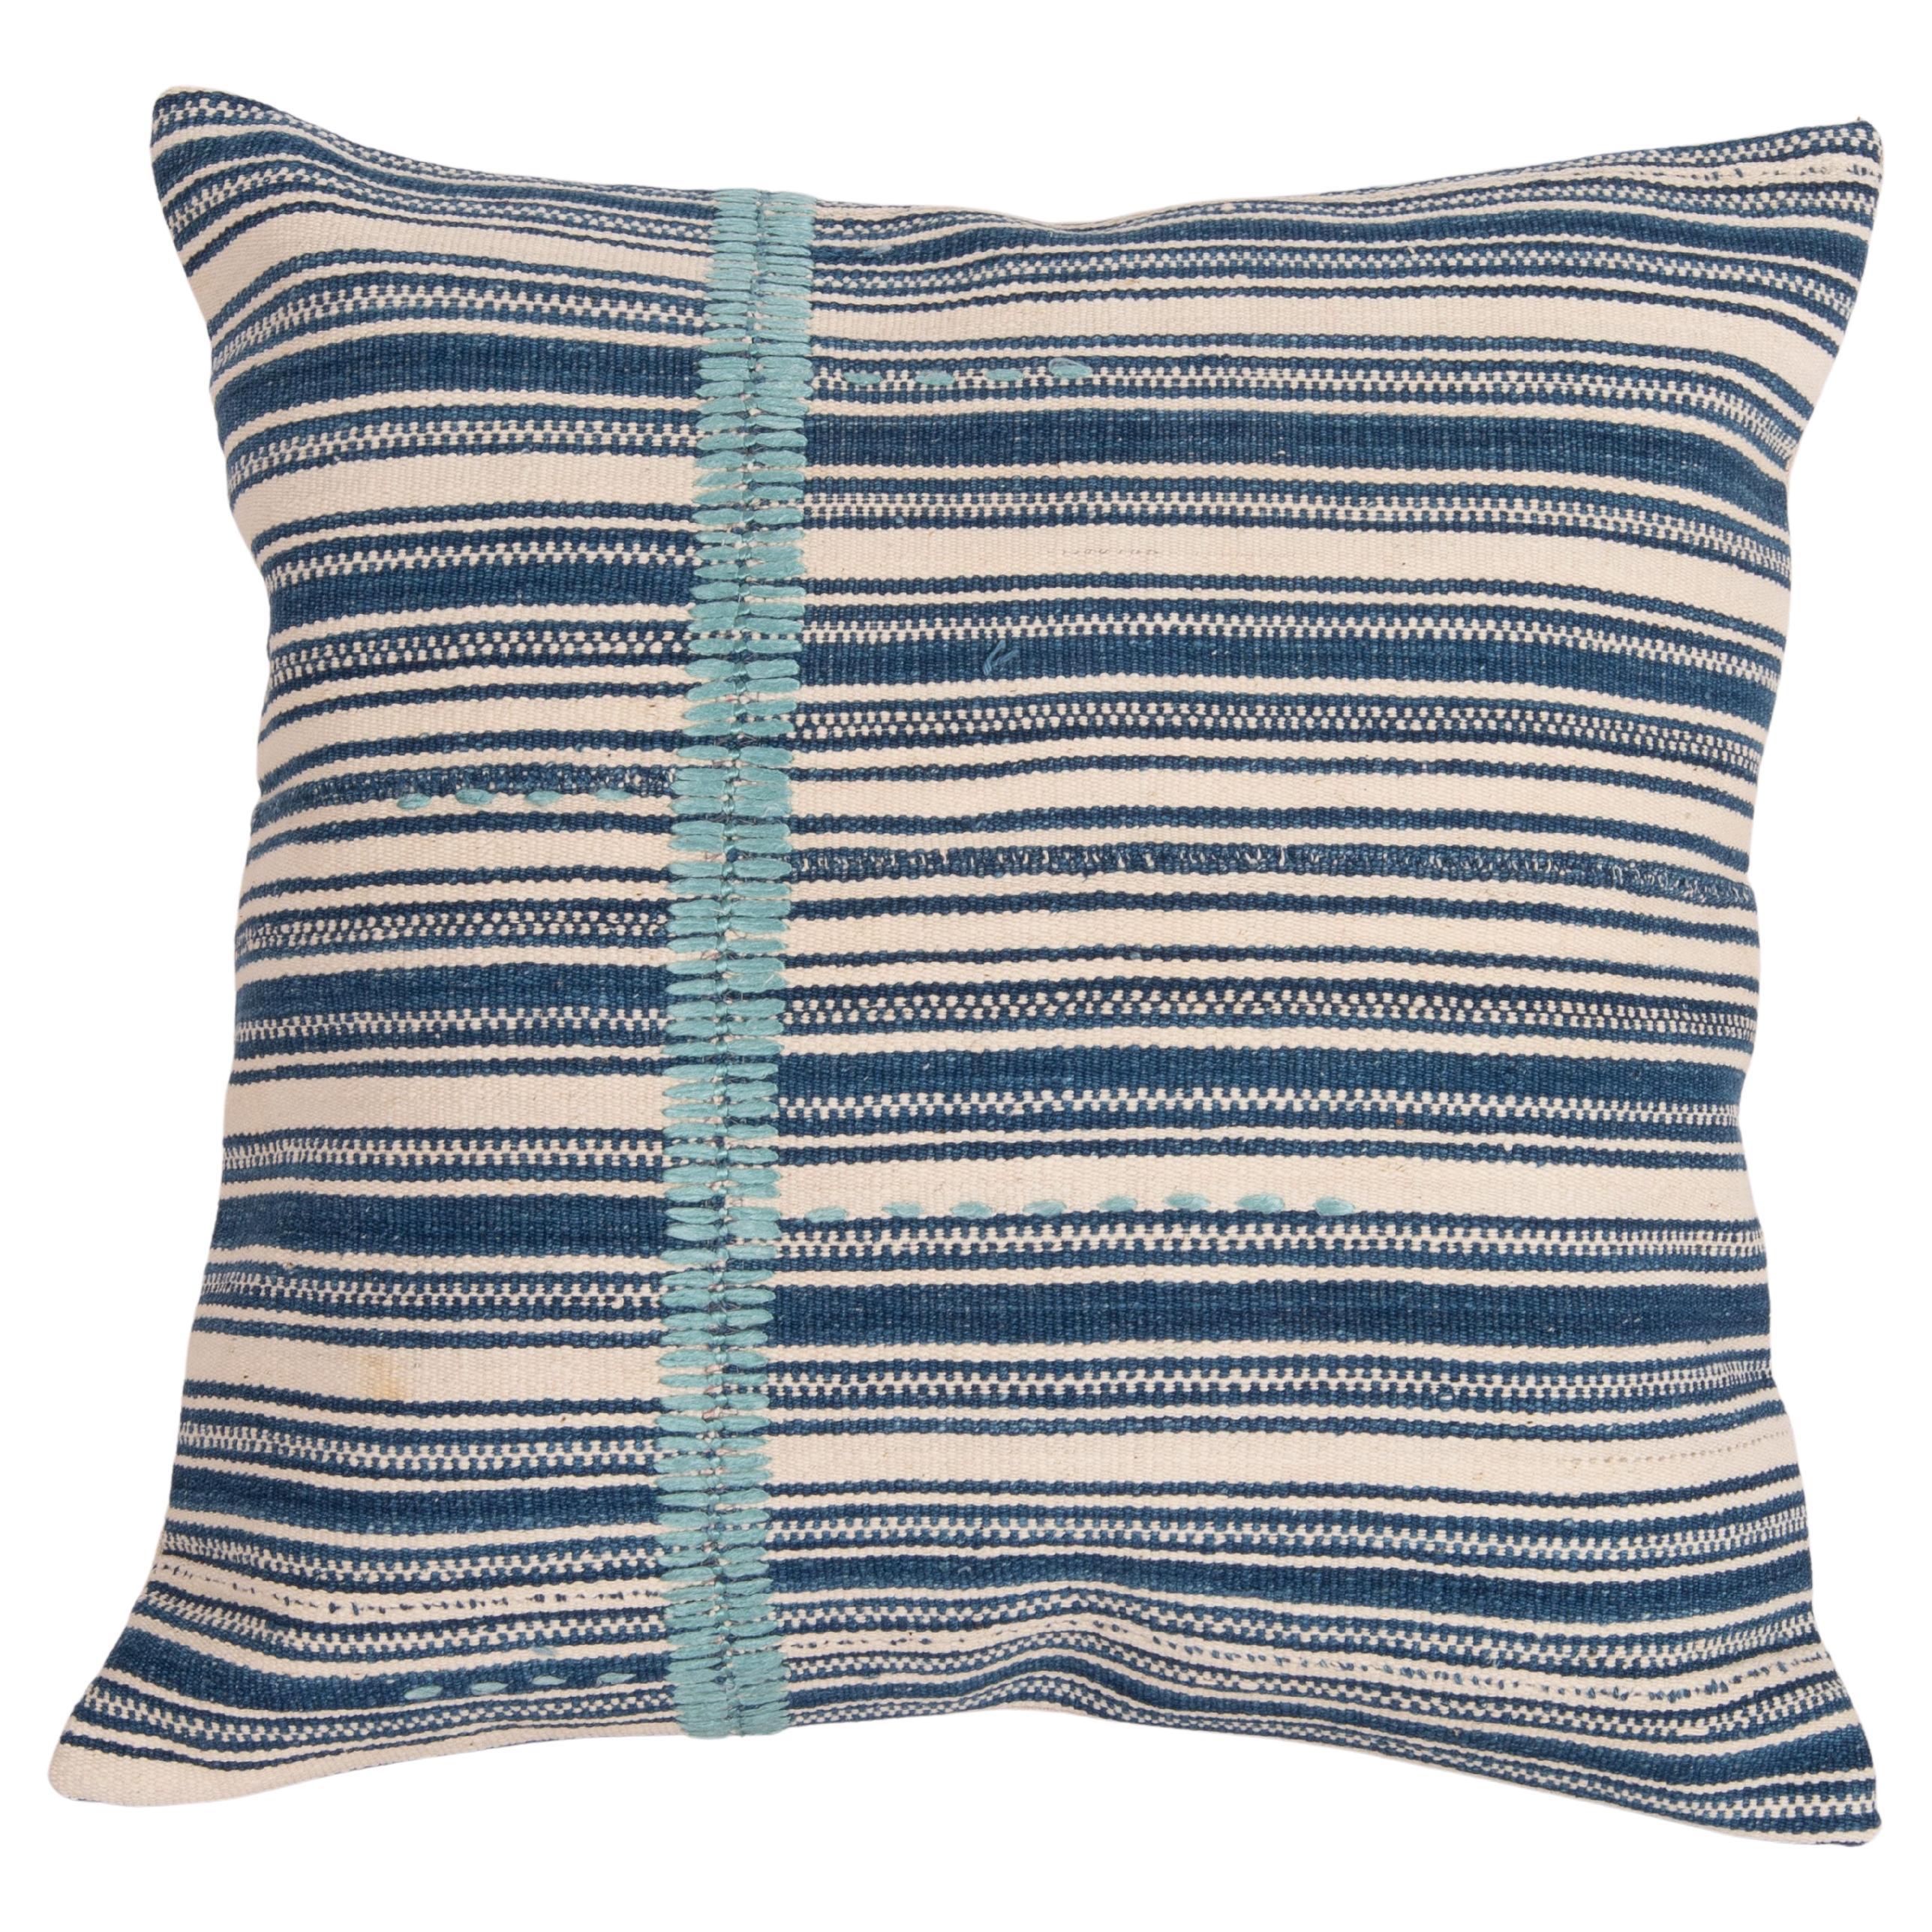 Indigo Stripped Pillow Cover, Made from a Mid 20th C. Turkish Kilim For Sale